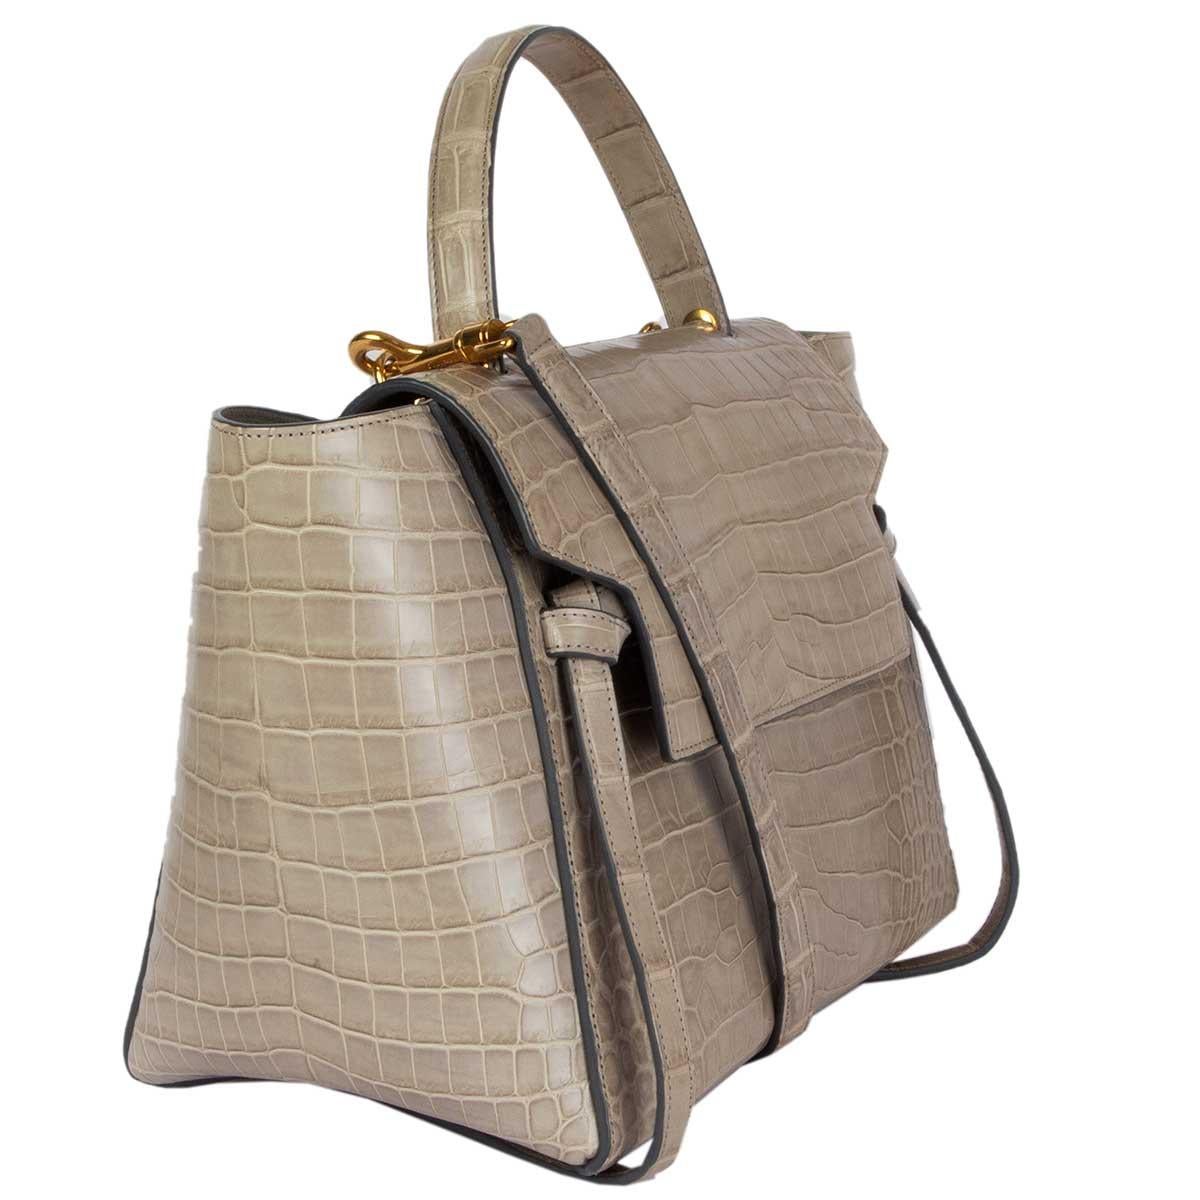 100% authentic Céline 'Mini Belt Bag' in light taupe crocodile. Opens with a hidden slide hook closure and is lined in light taupe lambskin. Has two open pockets against the back. Comes with a detachable shoulder strap. Has been carried and is in